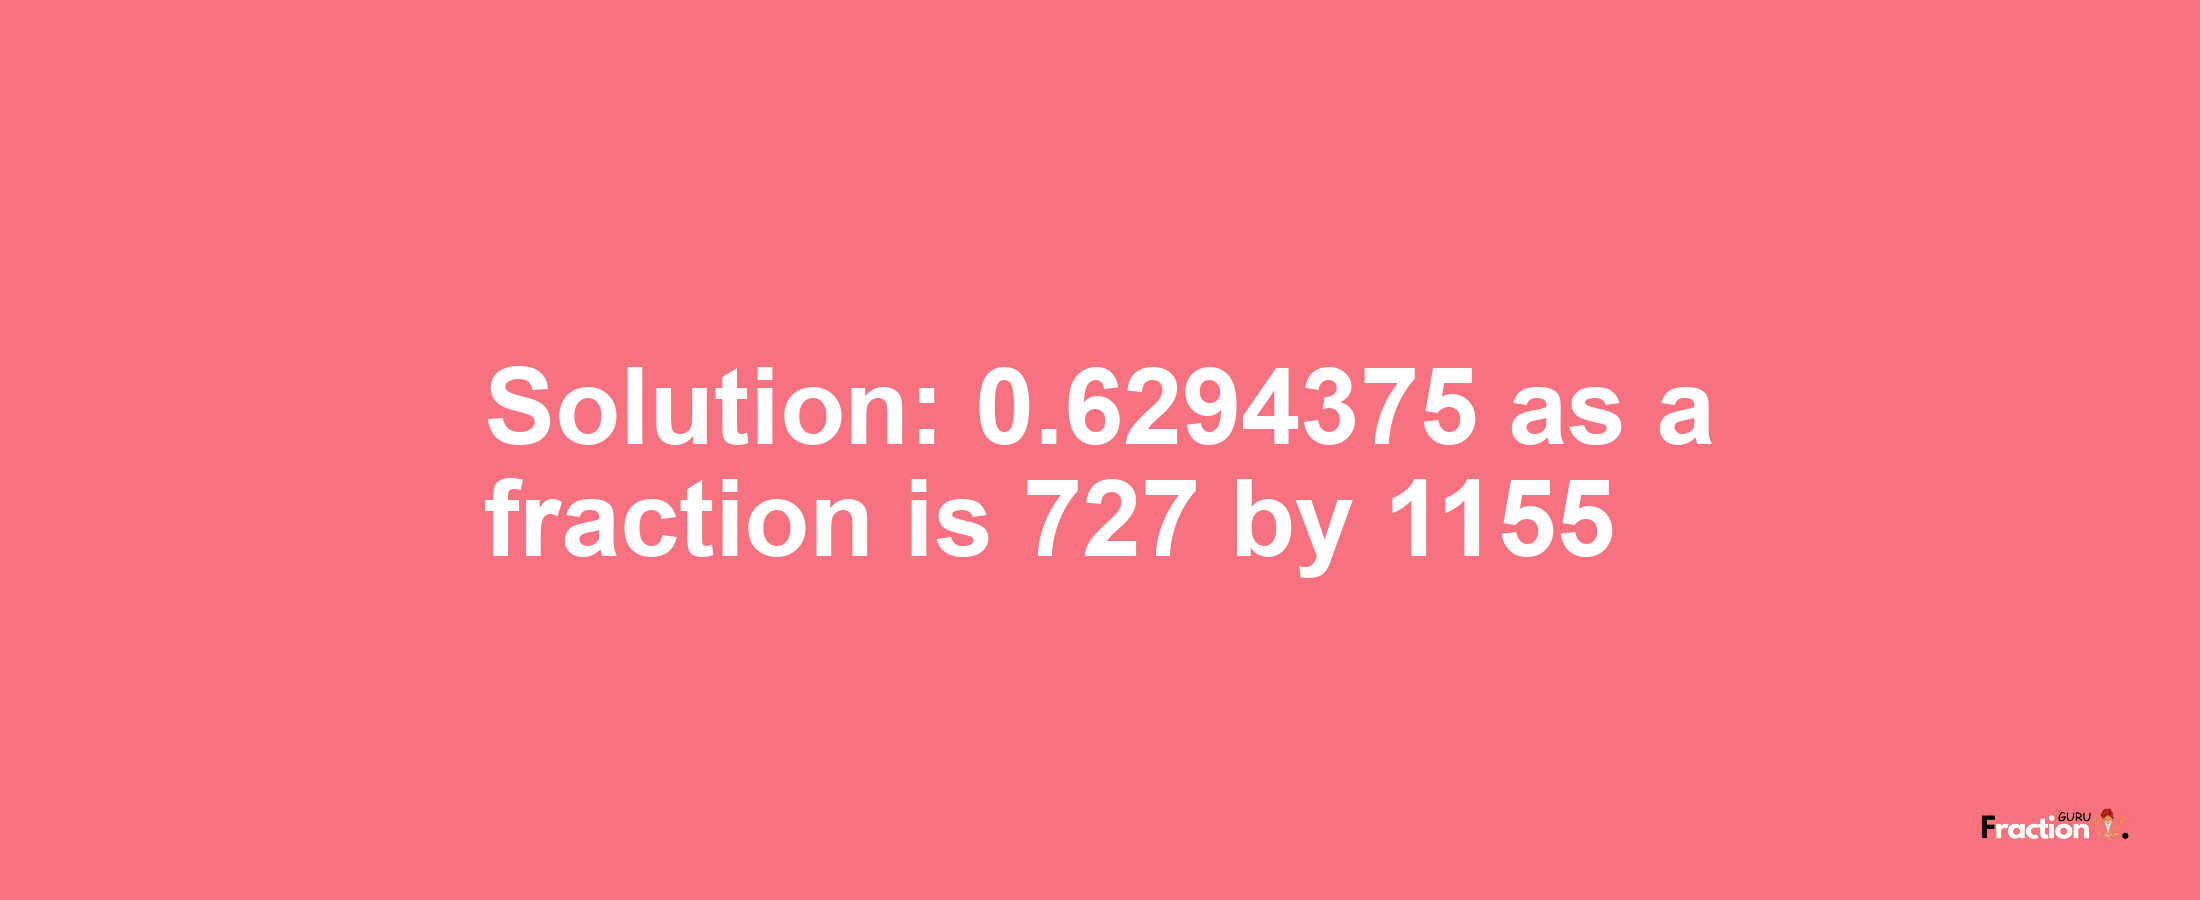 Solution:0.6294375 as a fraction is 727/1155